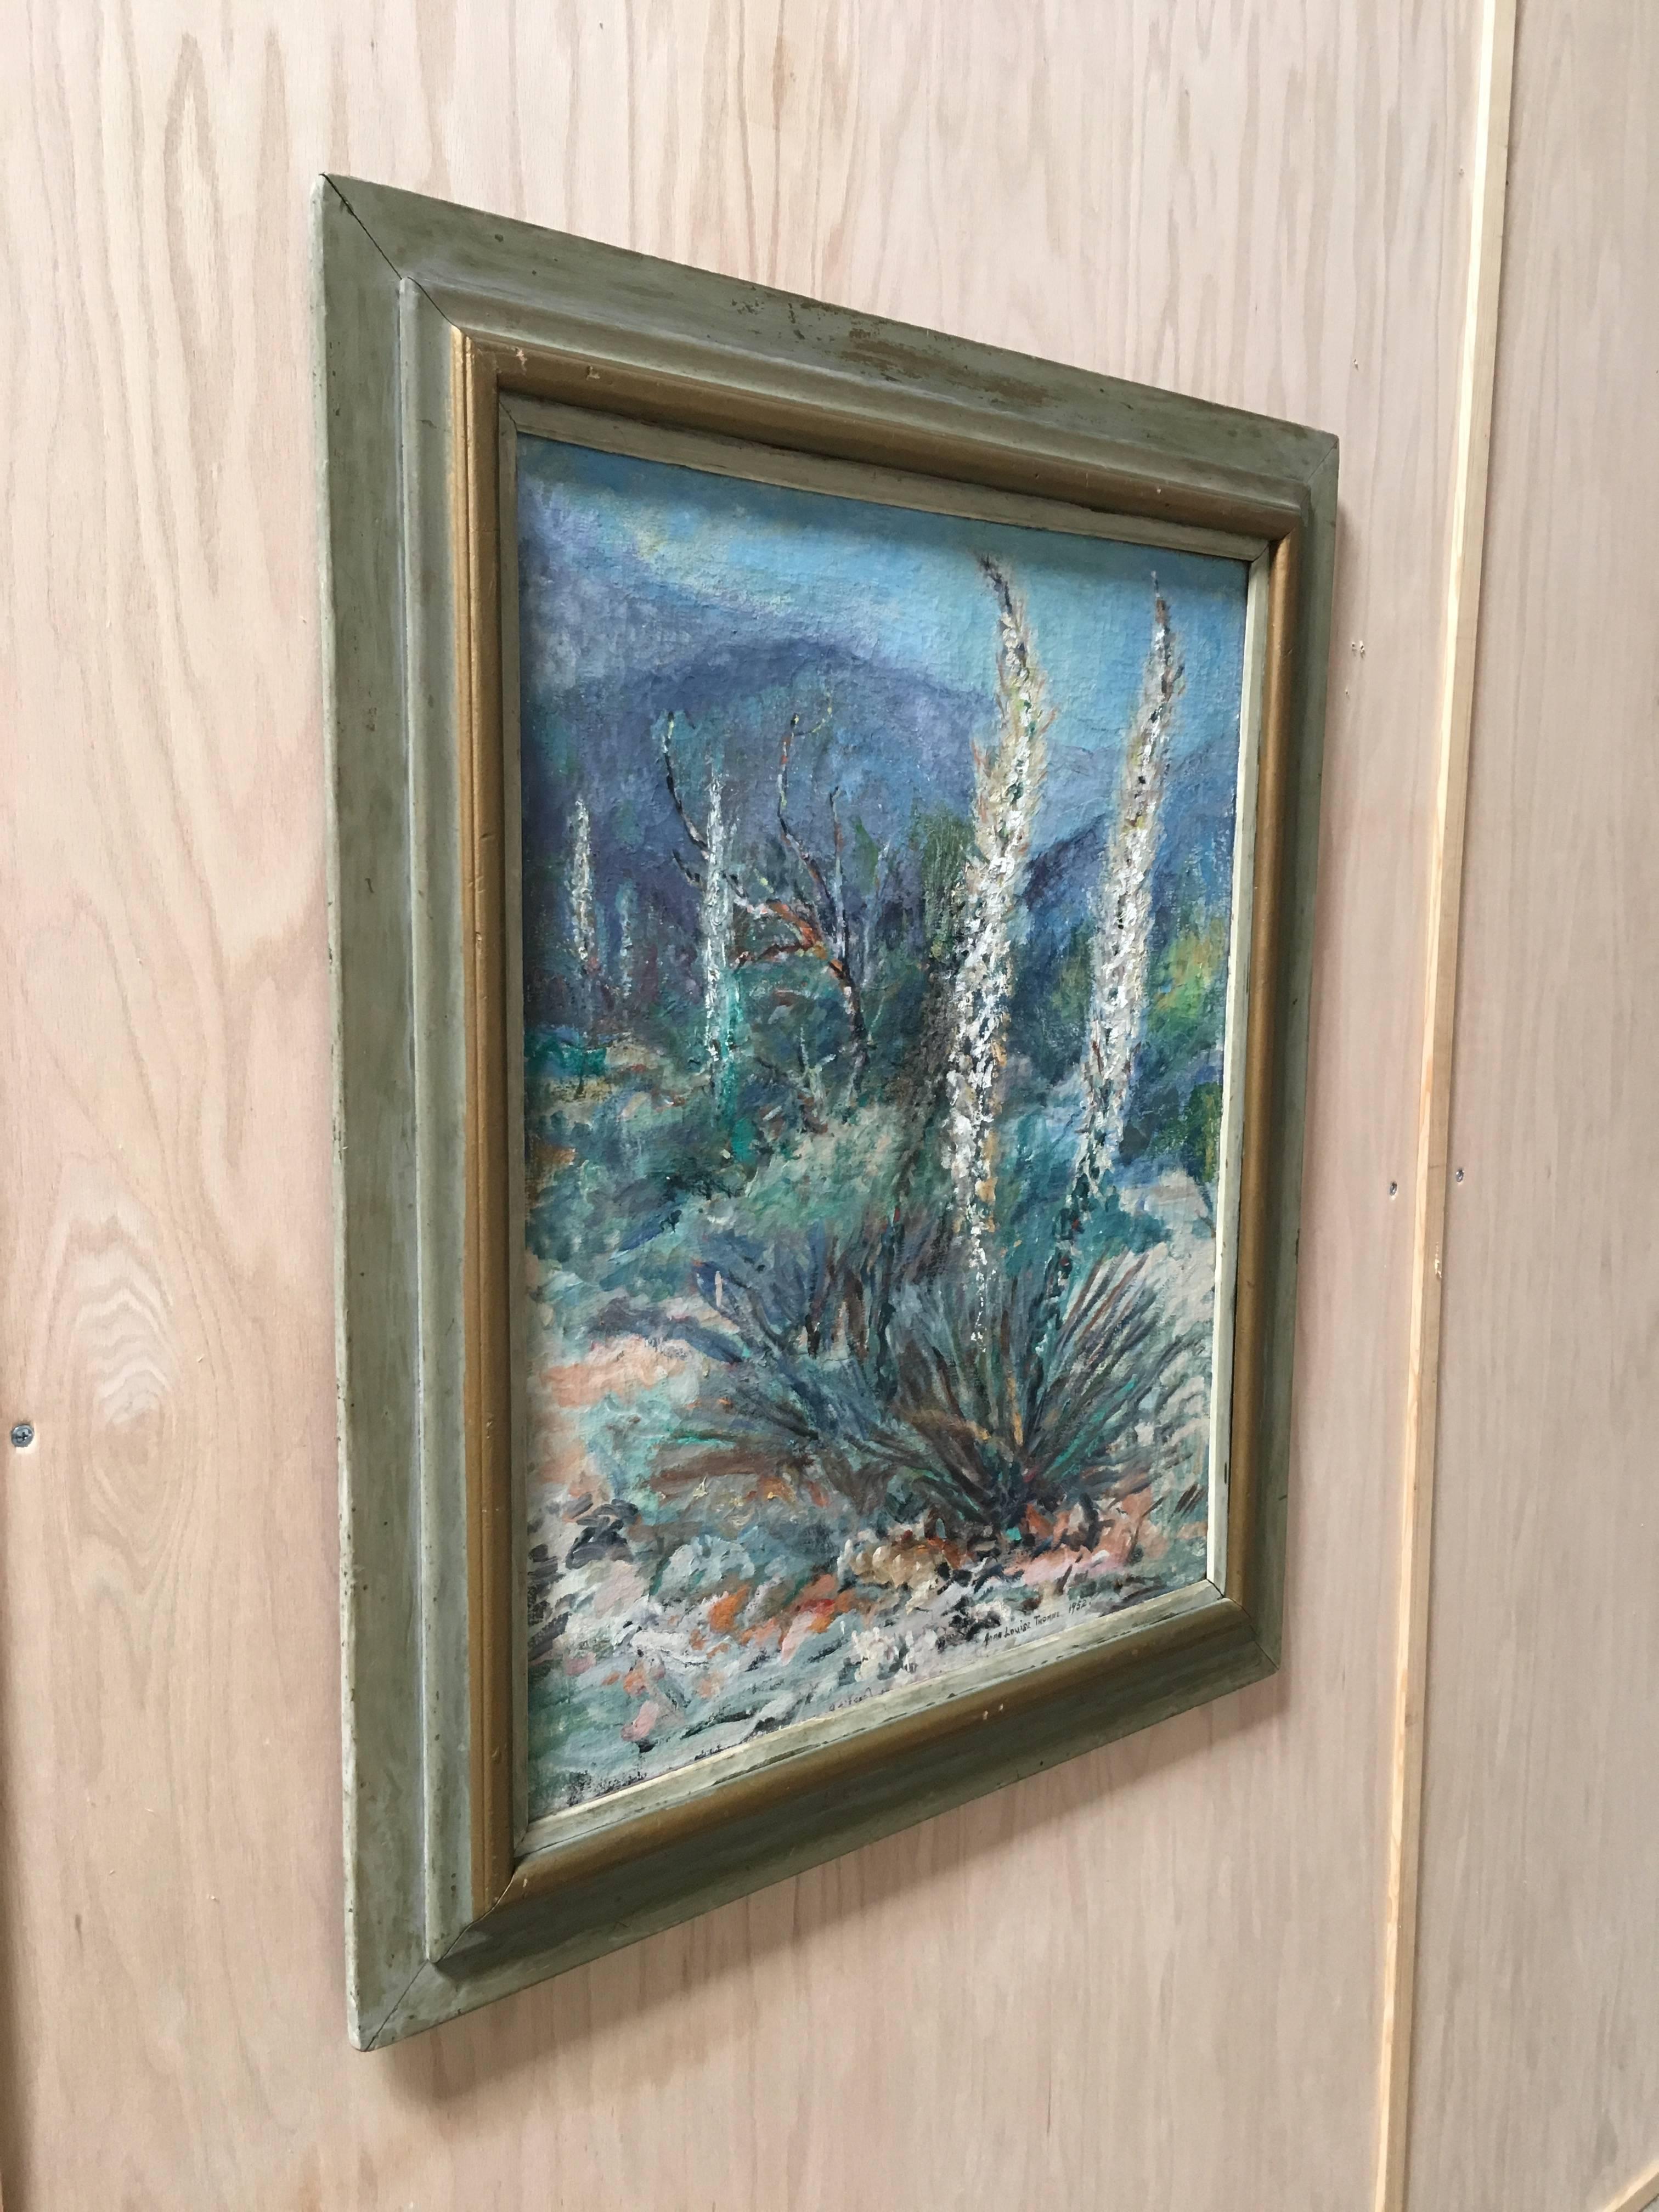 Yucca valley oil on canvas painting by Anna Louise Thorne, 1952.